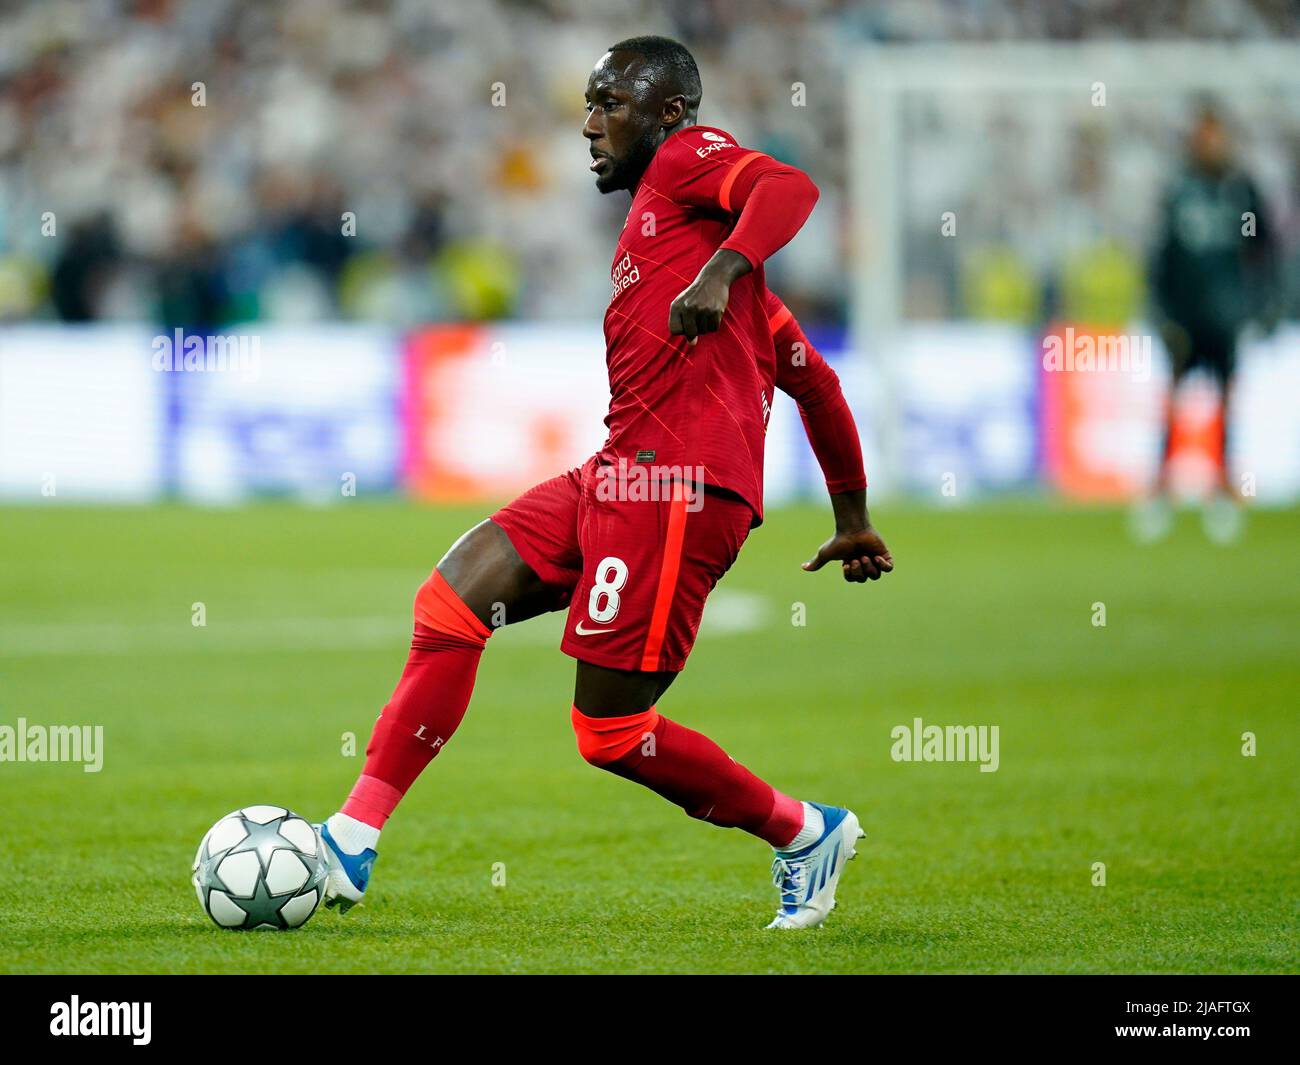 Naby Keita of Liverpool FC during the UEFA Champions League Final match between Liverpool FC and Real Madrid played at Stade de France on May 28, 2022 in Paris, France. (Photo / Magma) Stock Photo